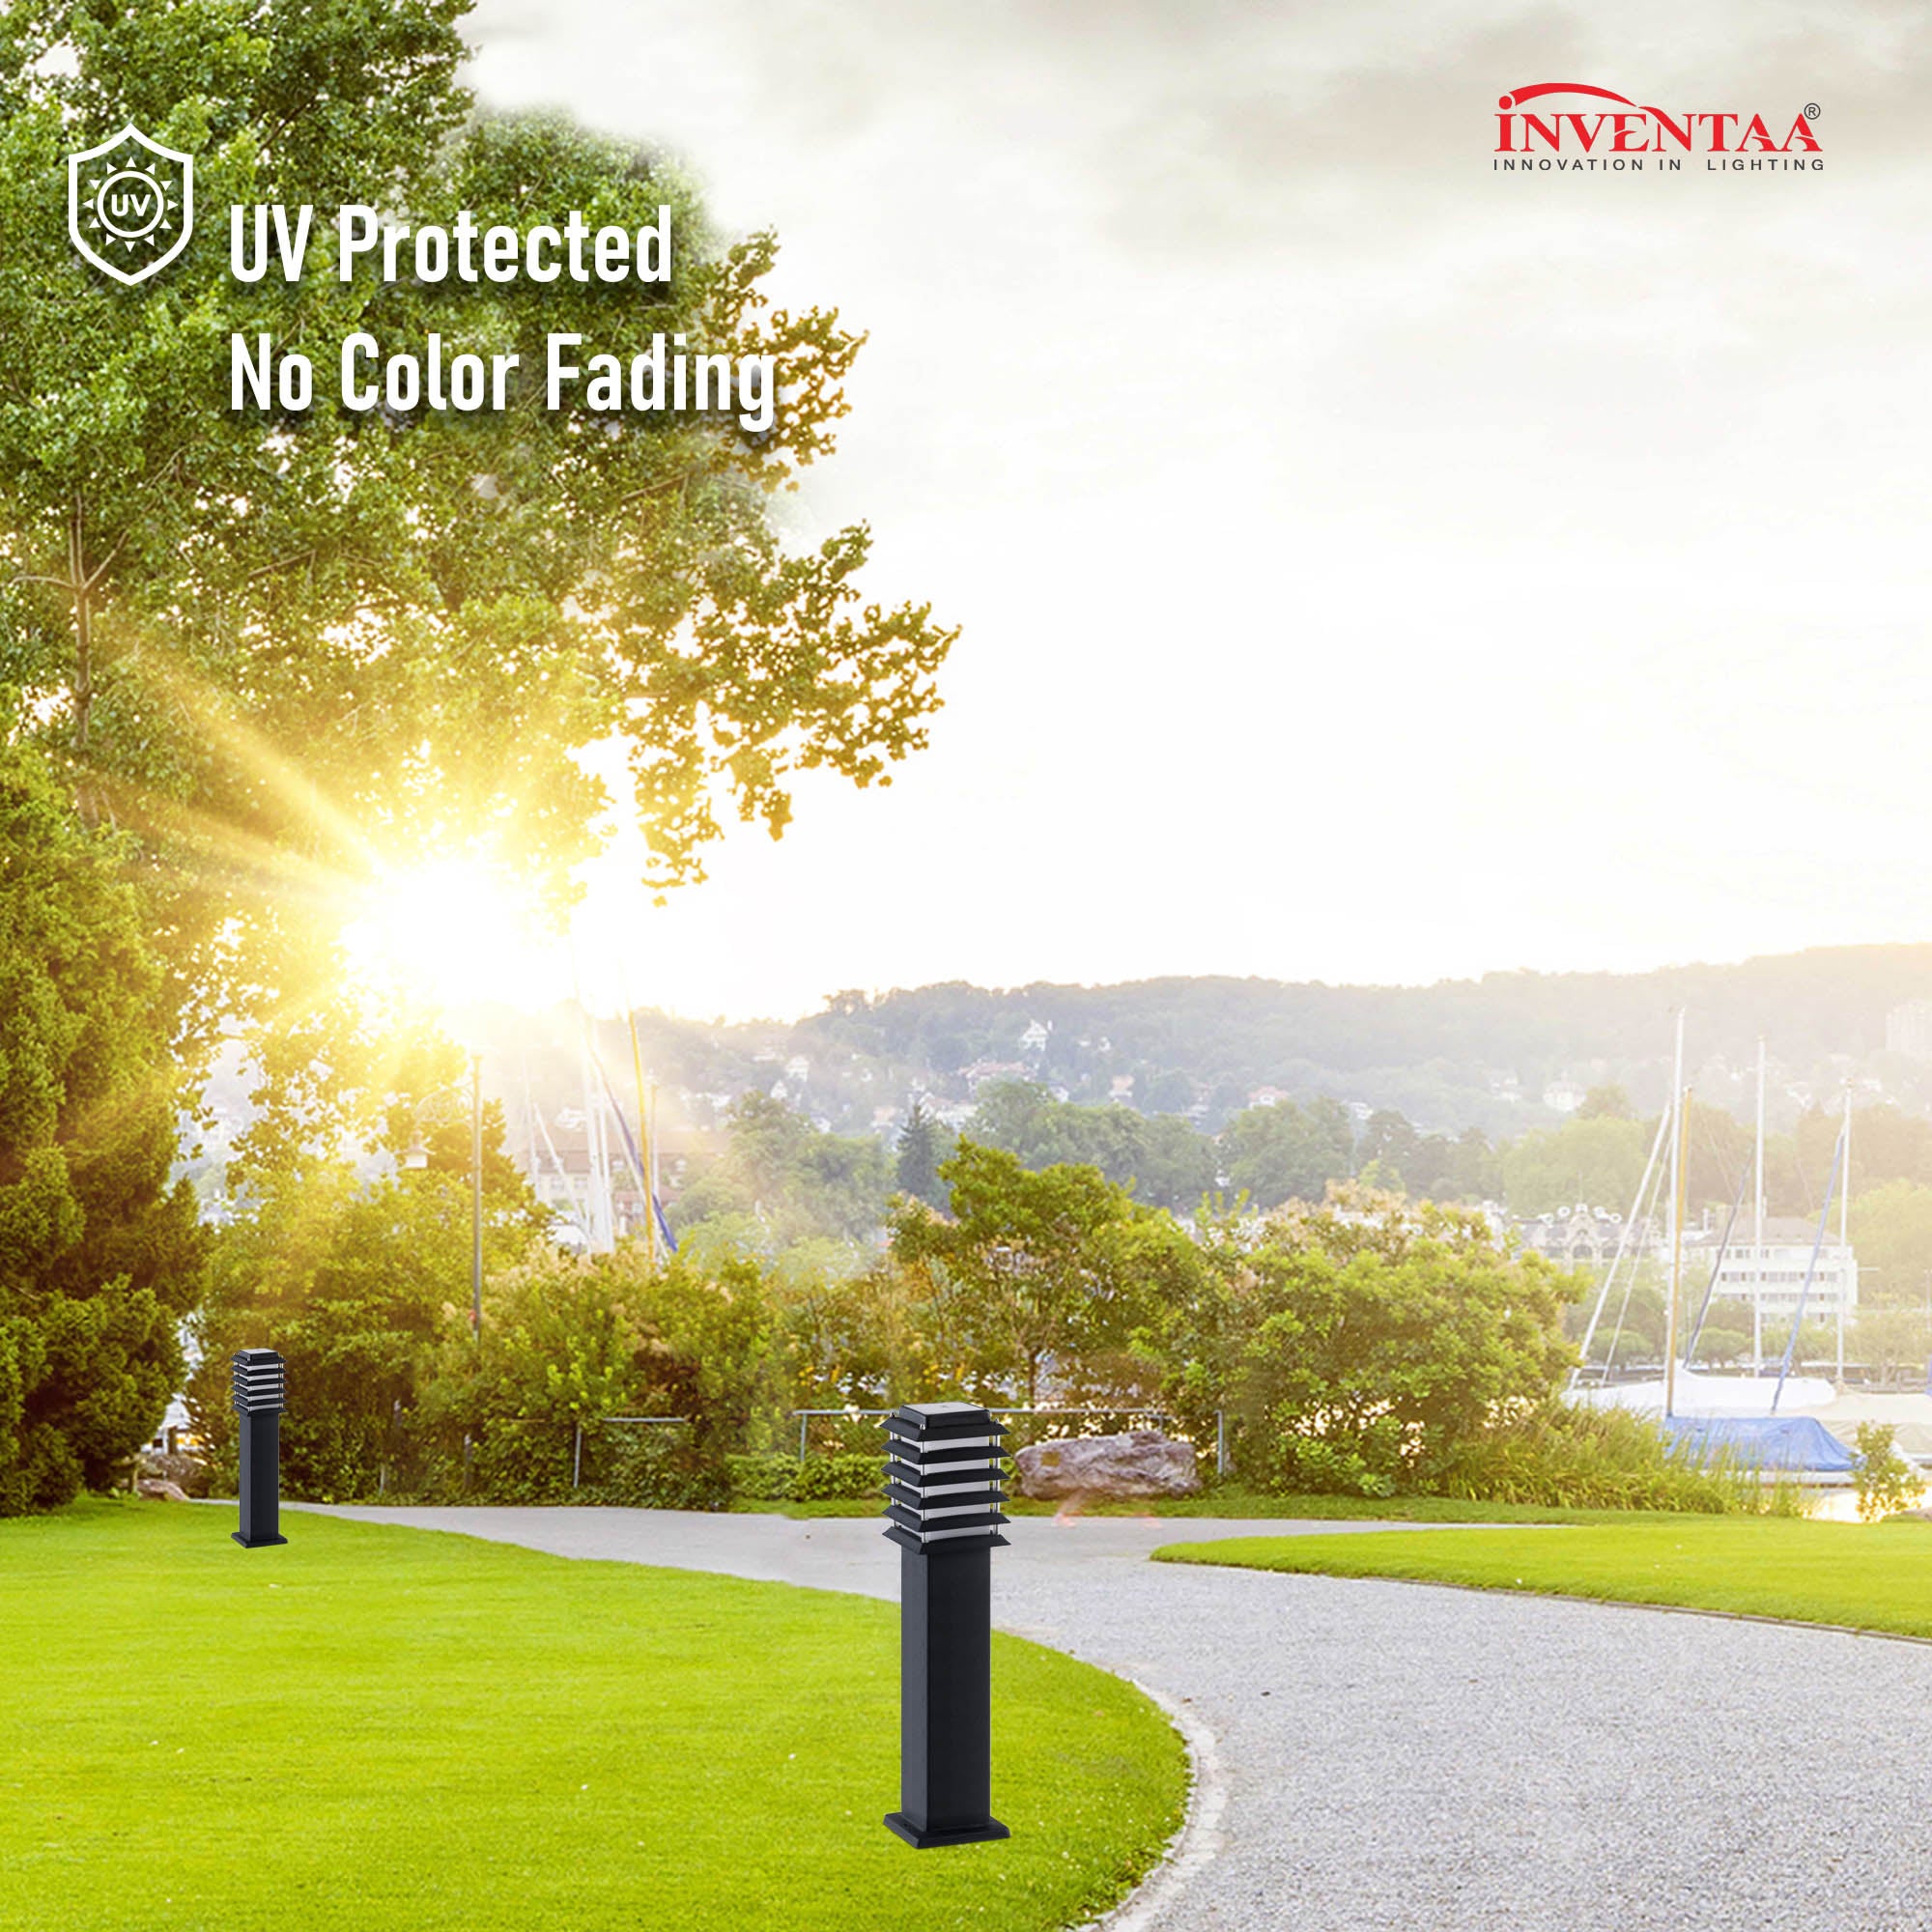  Riya 2 feet led garden bollard light faeturing its UV protected and no color fading for enduring performance #size_2 feet